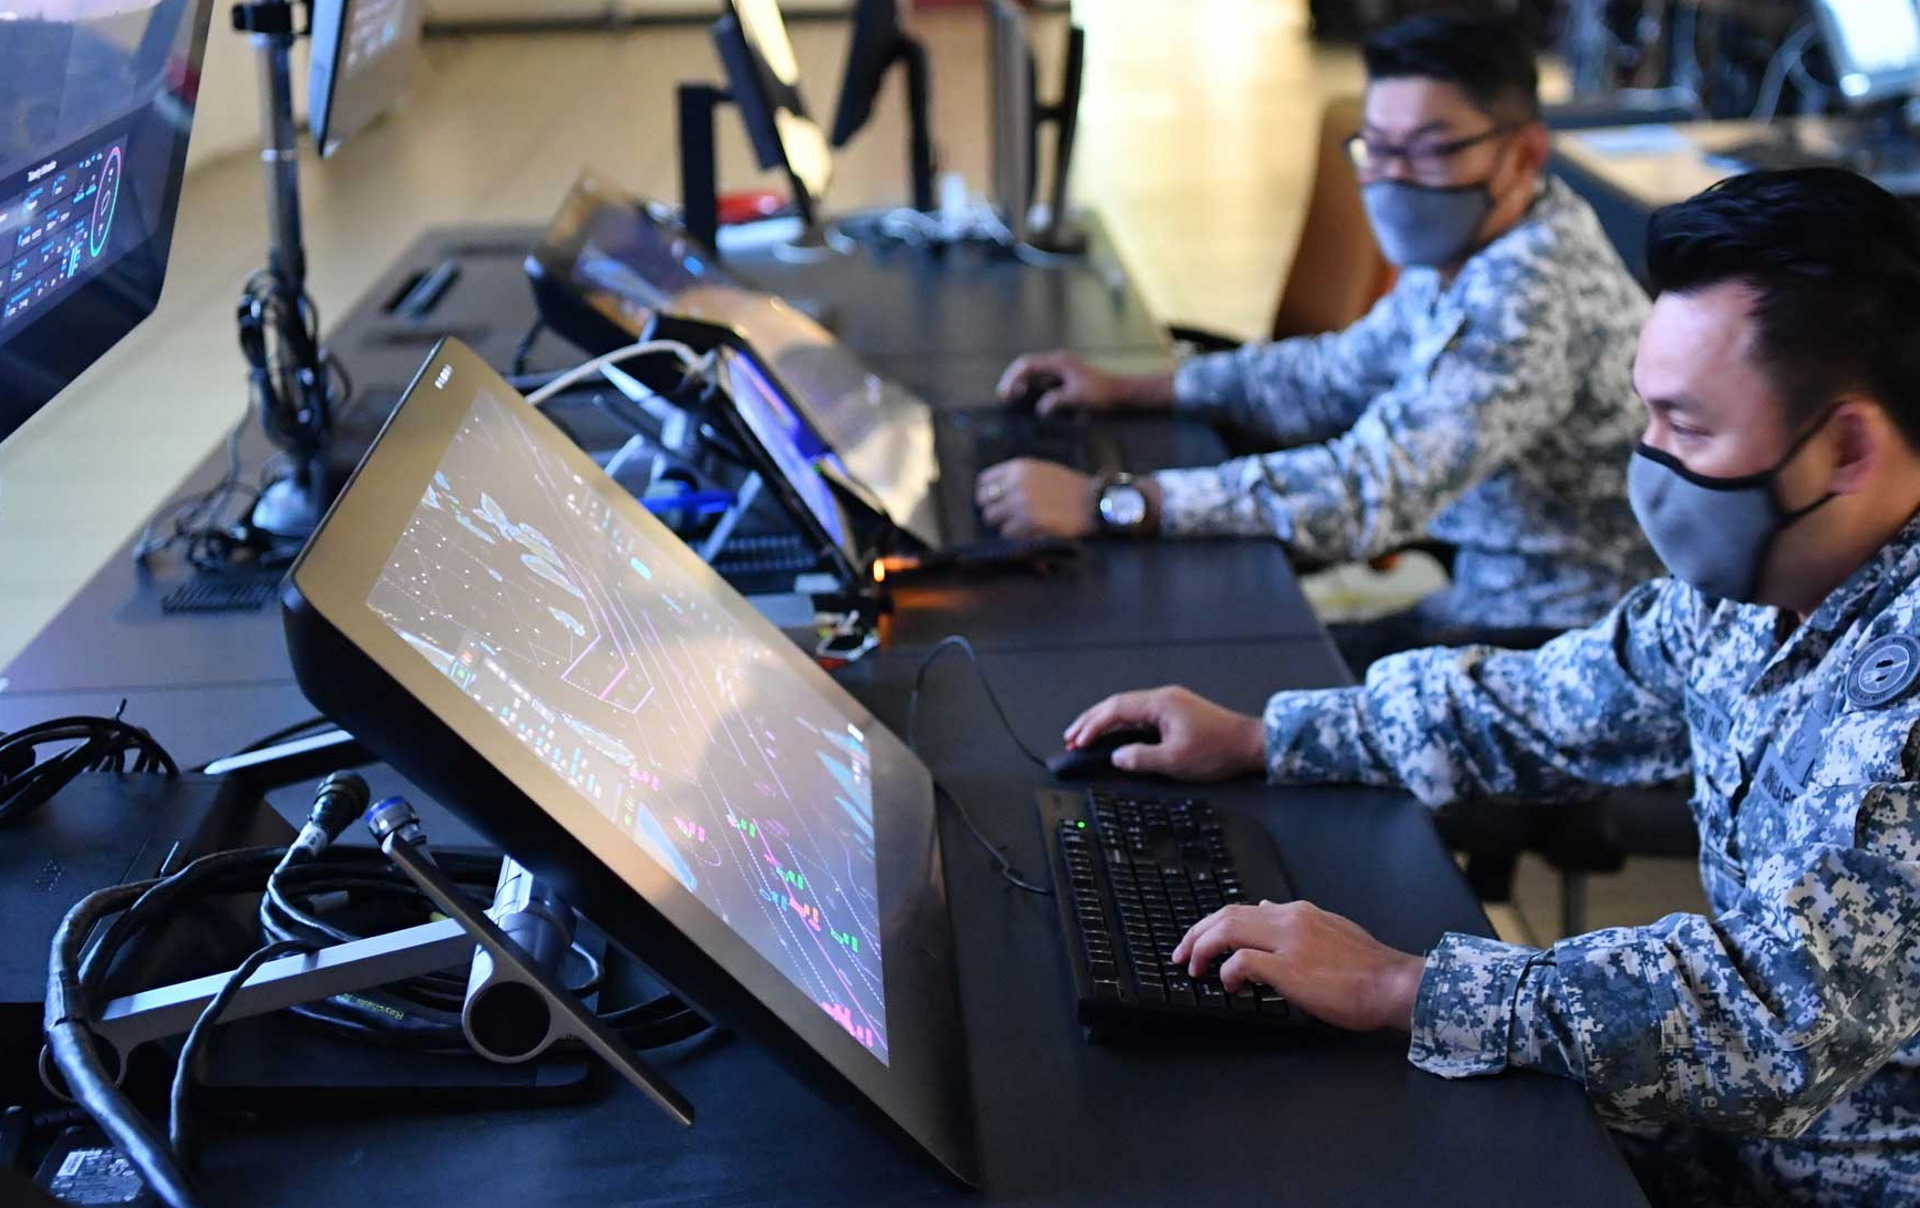 The intuitive design of the Unmanned Systems Mission Control, which was developed by DSTA, allows USV operators to plan for missions on screen easily â€“ just like the way gamers do in a computer game.